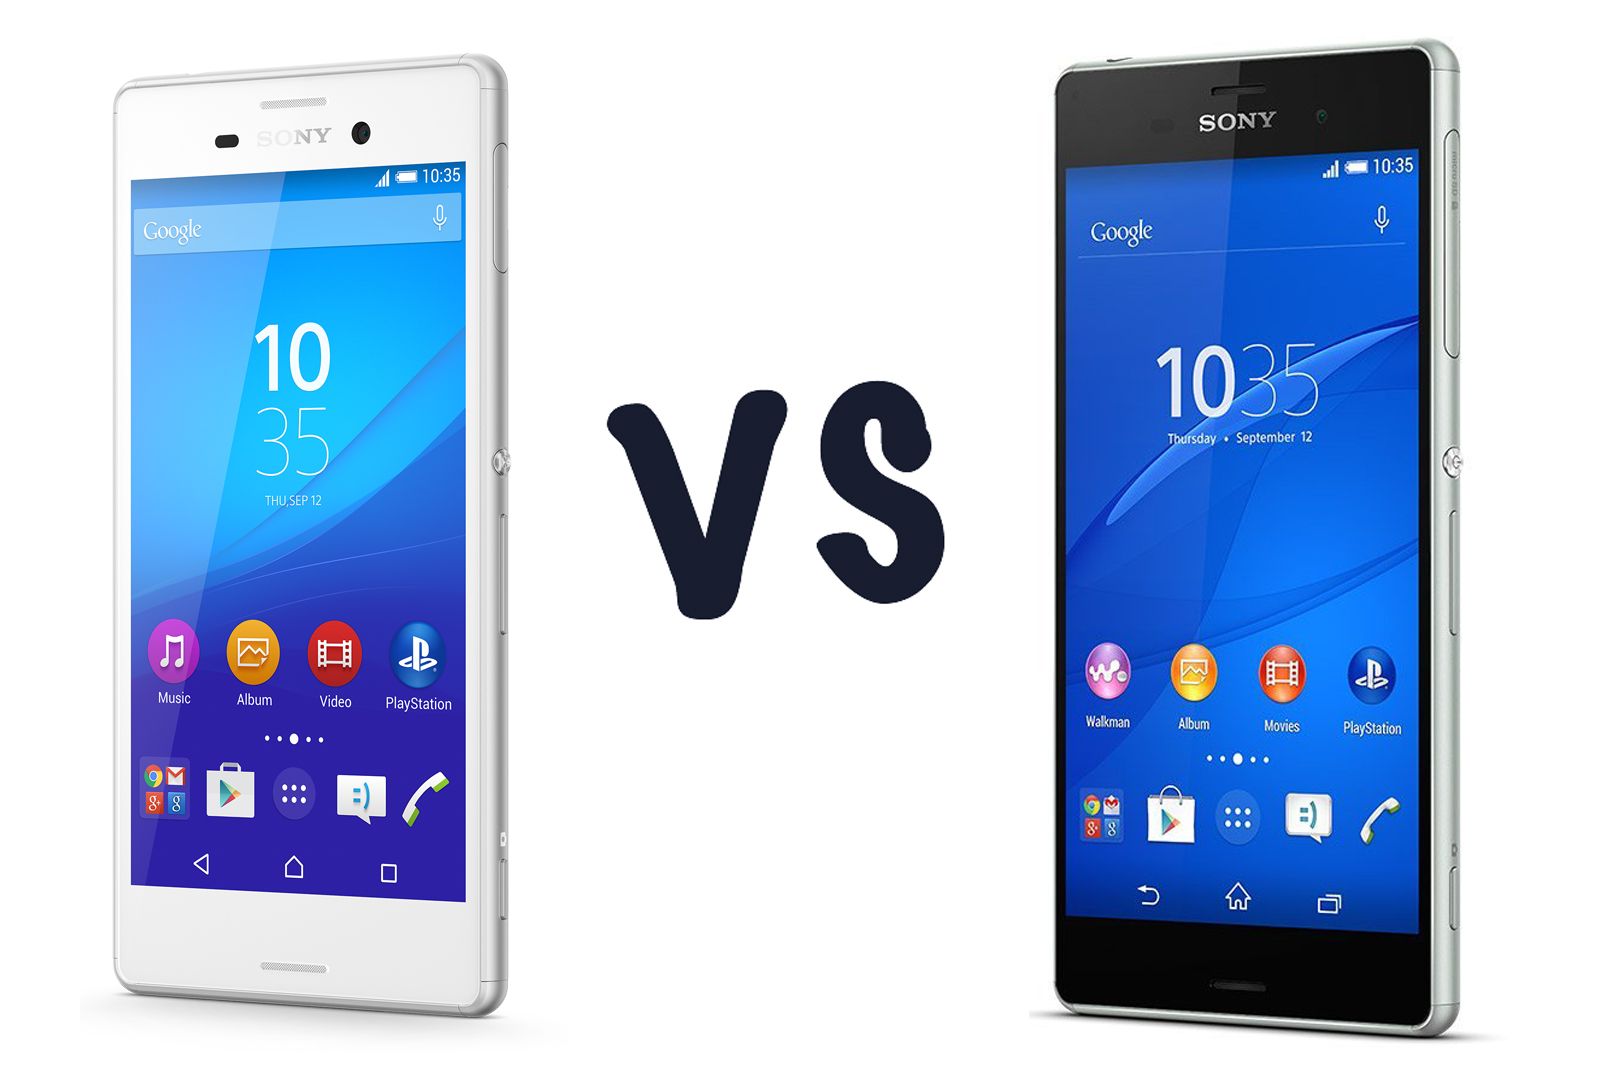 sony xperia m4 aqua vs sony xperia z3 what s the difference from mid range to flagship  image 1